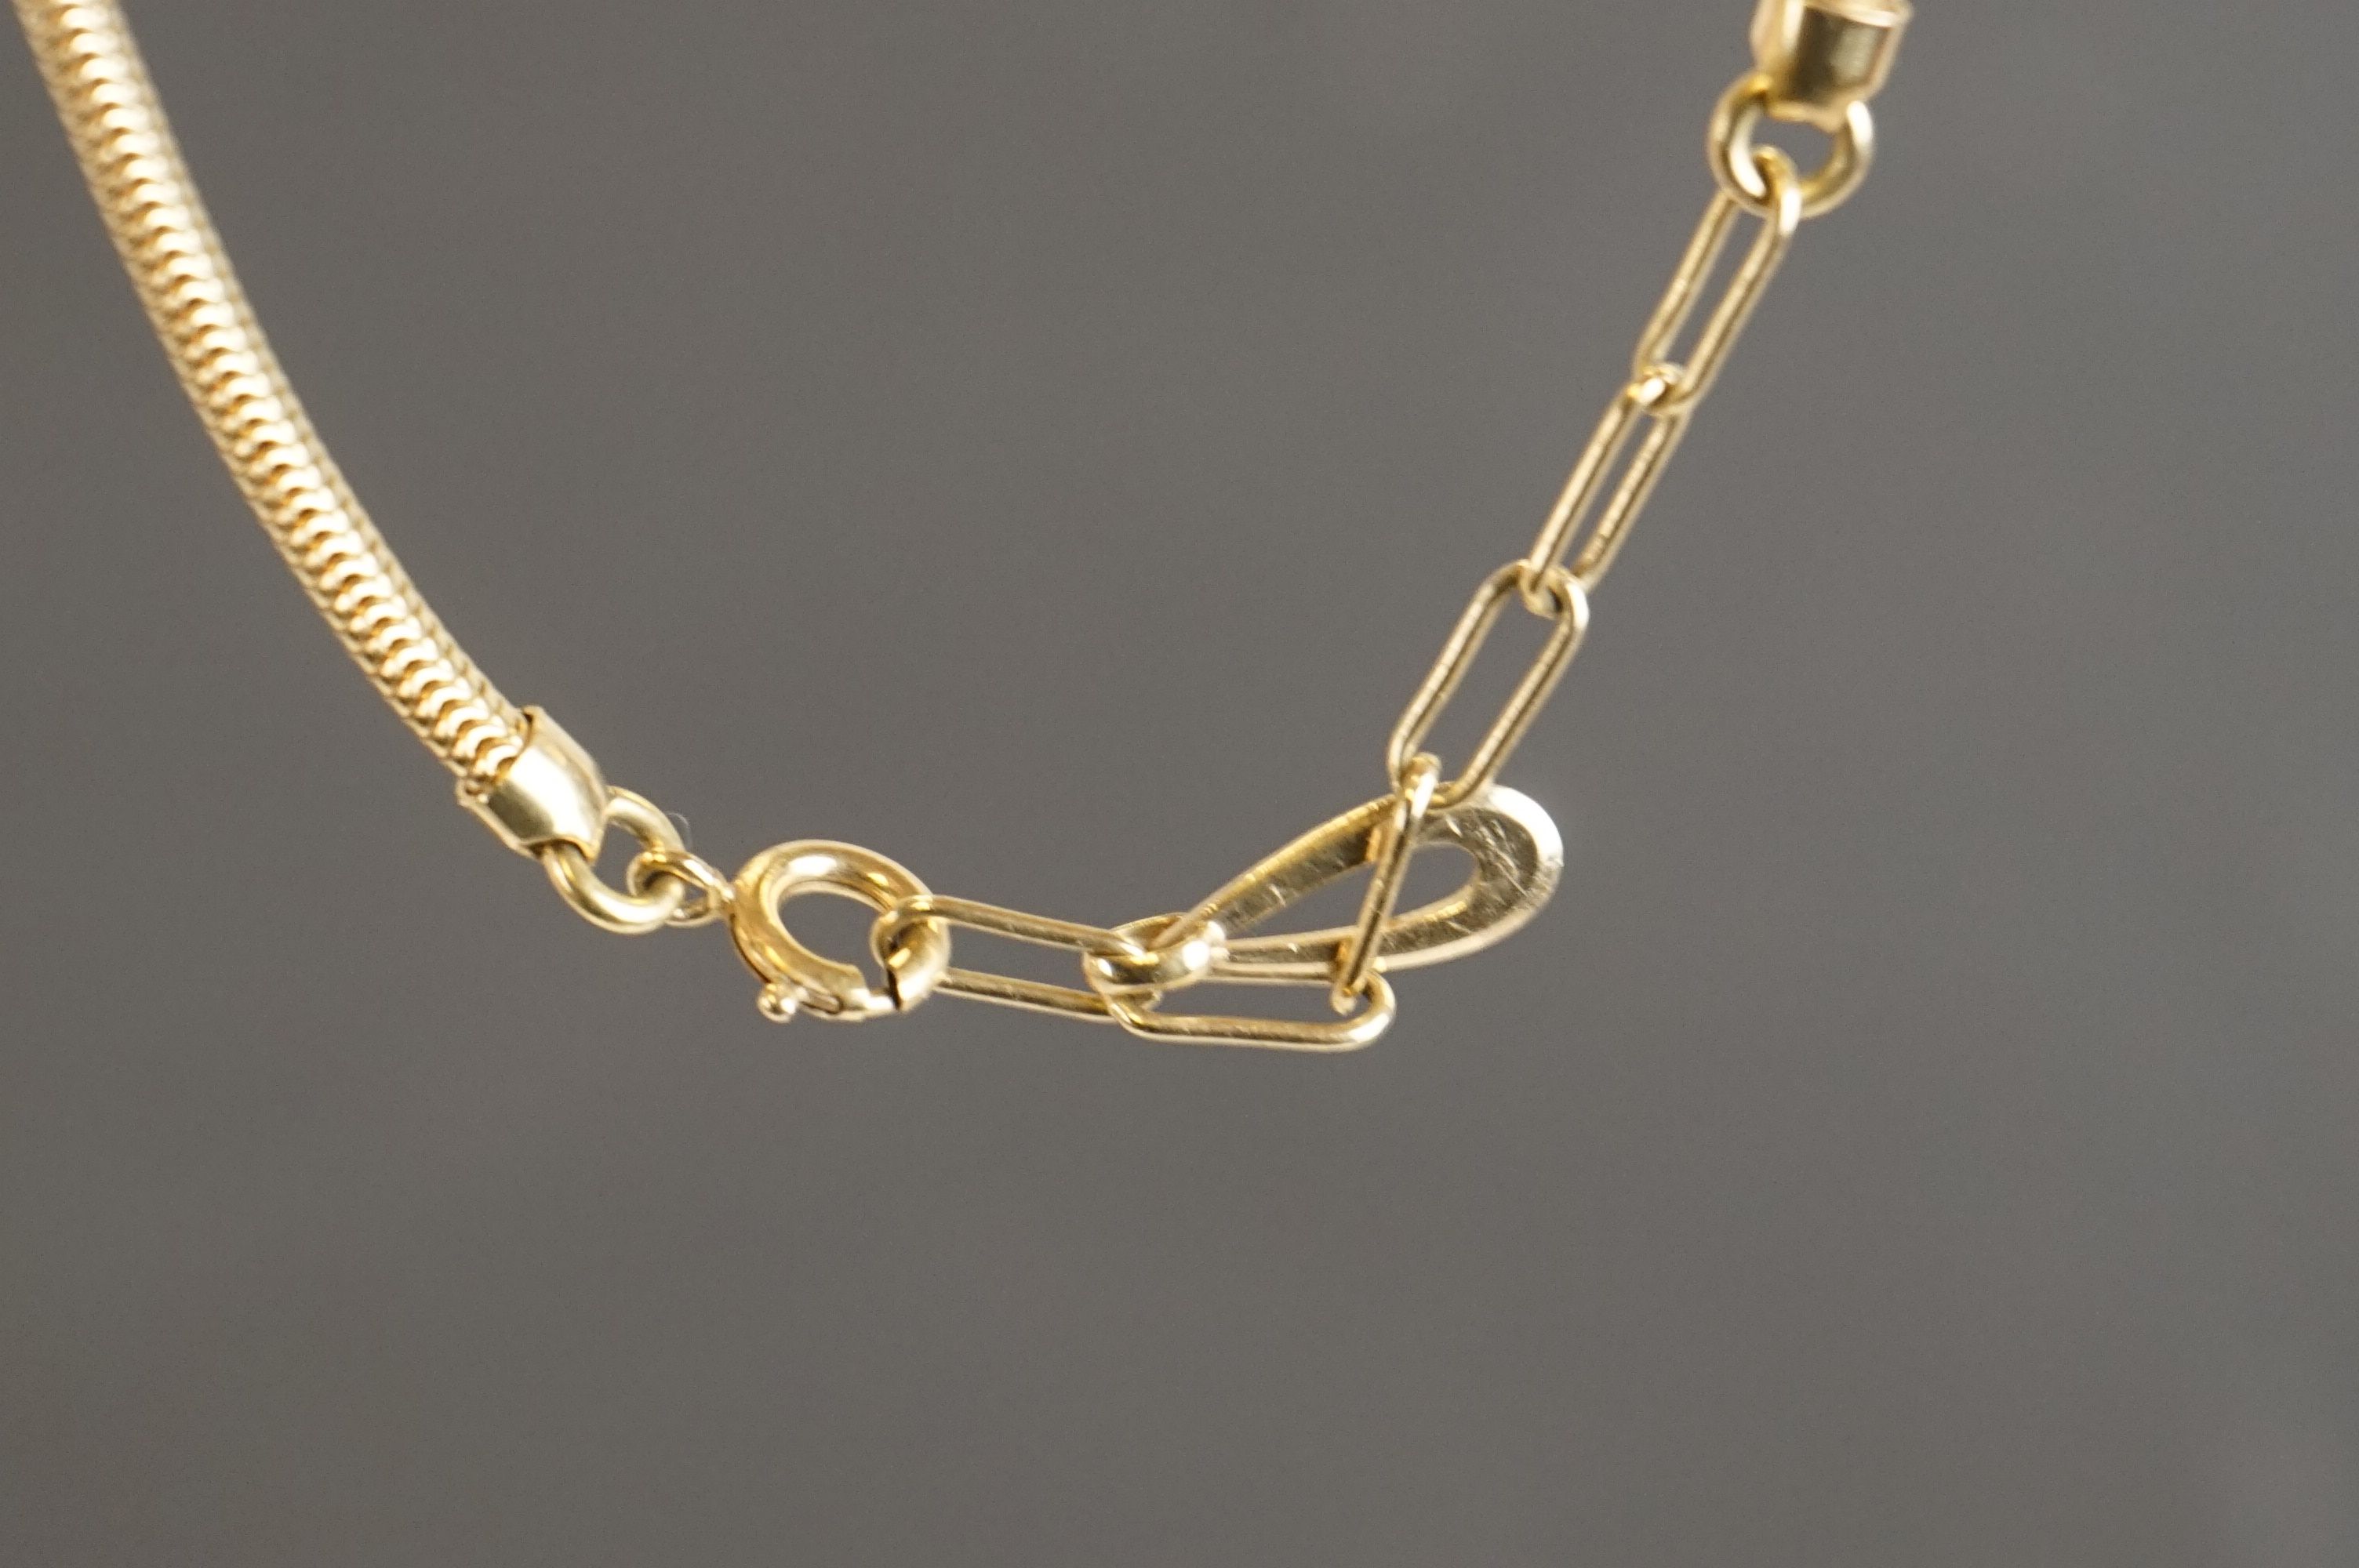 A yellow metal necklace in the form of a snake. - Image 5 of 6